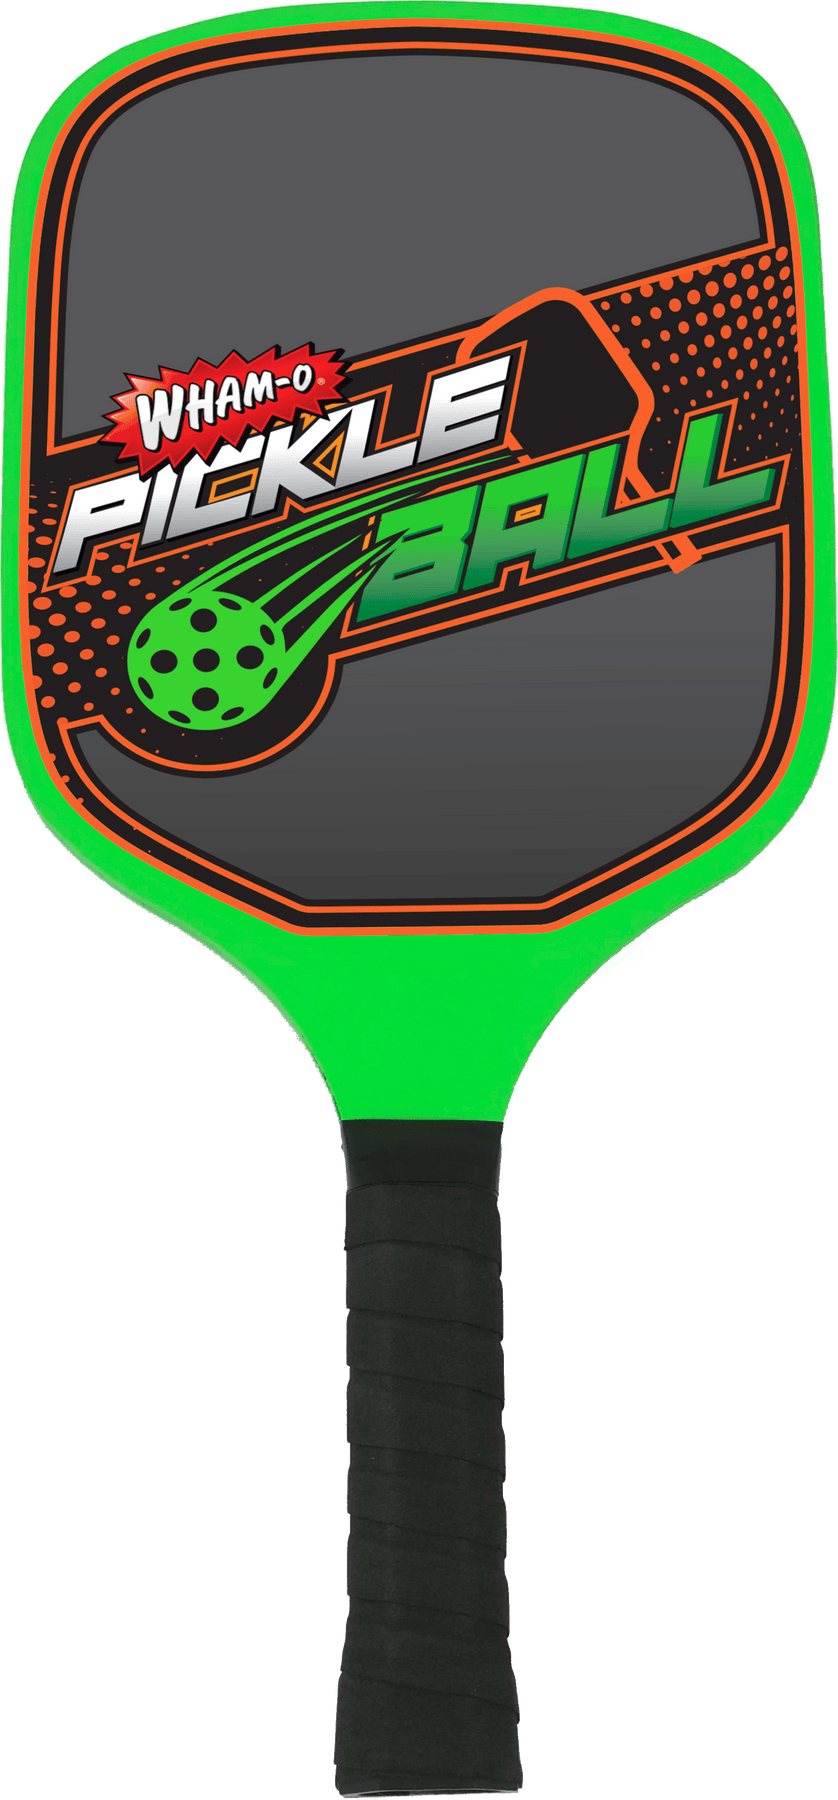 Deluxe Pickleball Game Sets